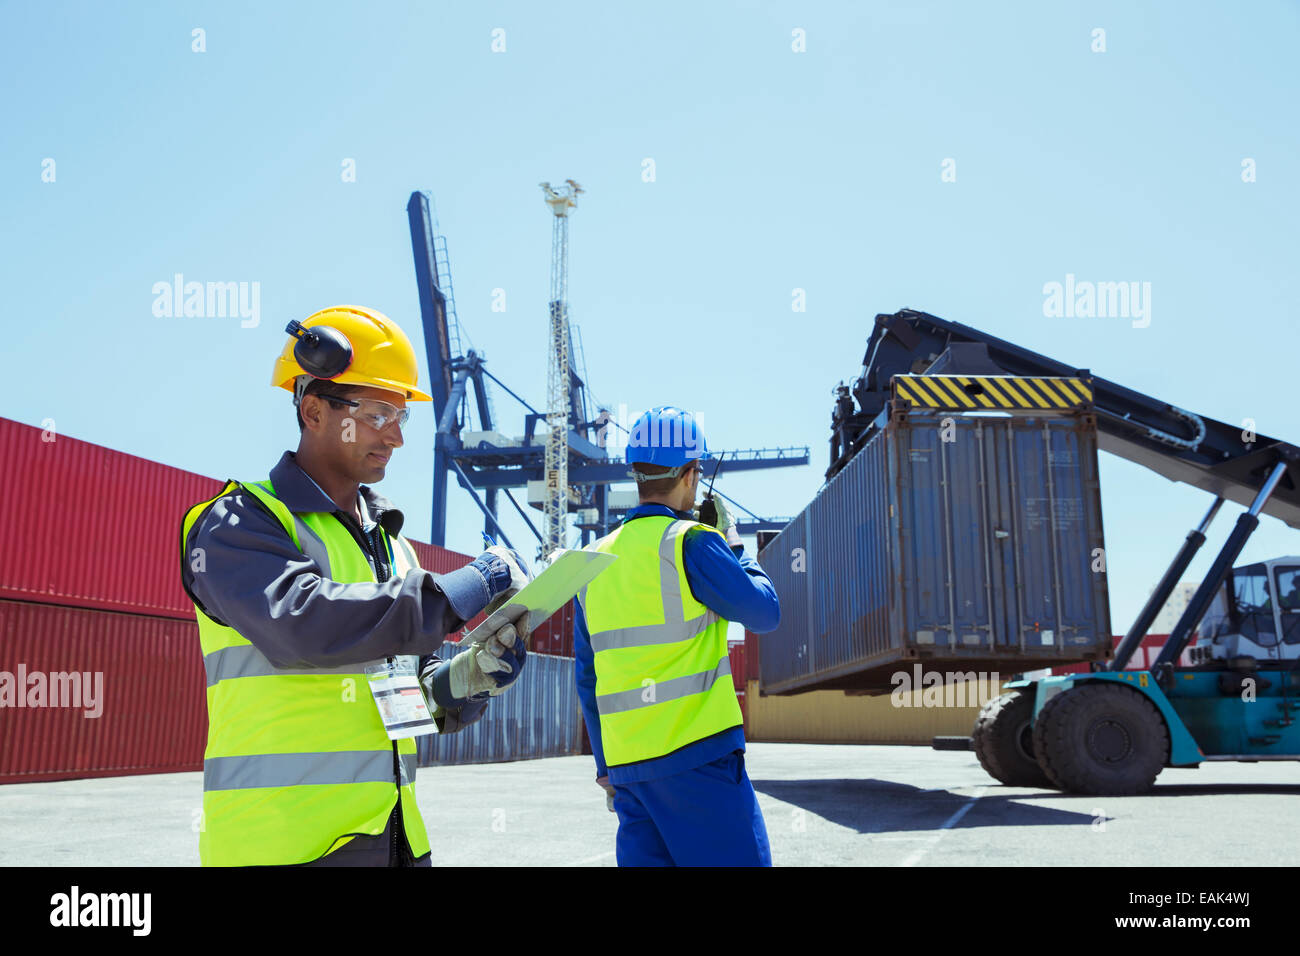 Workers near cargo containers Stock Photo